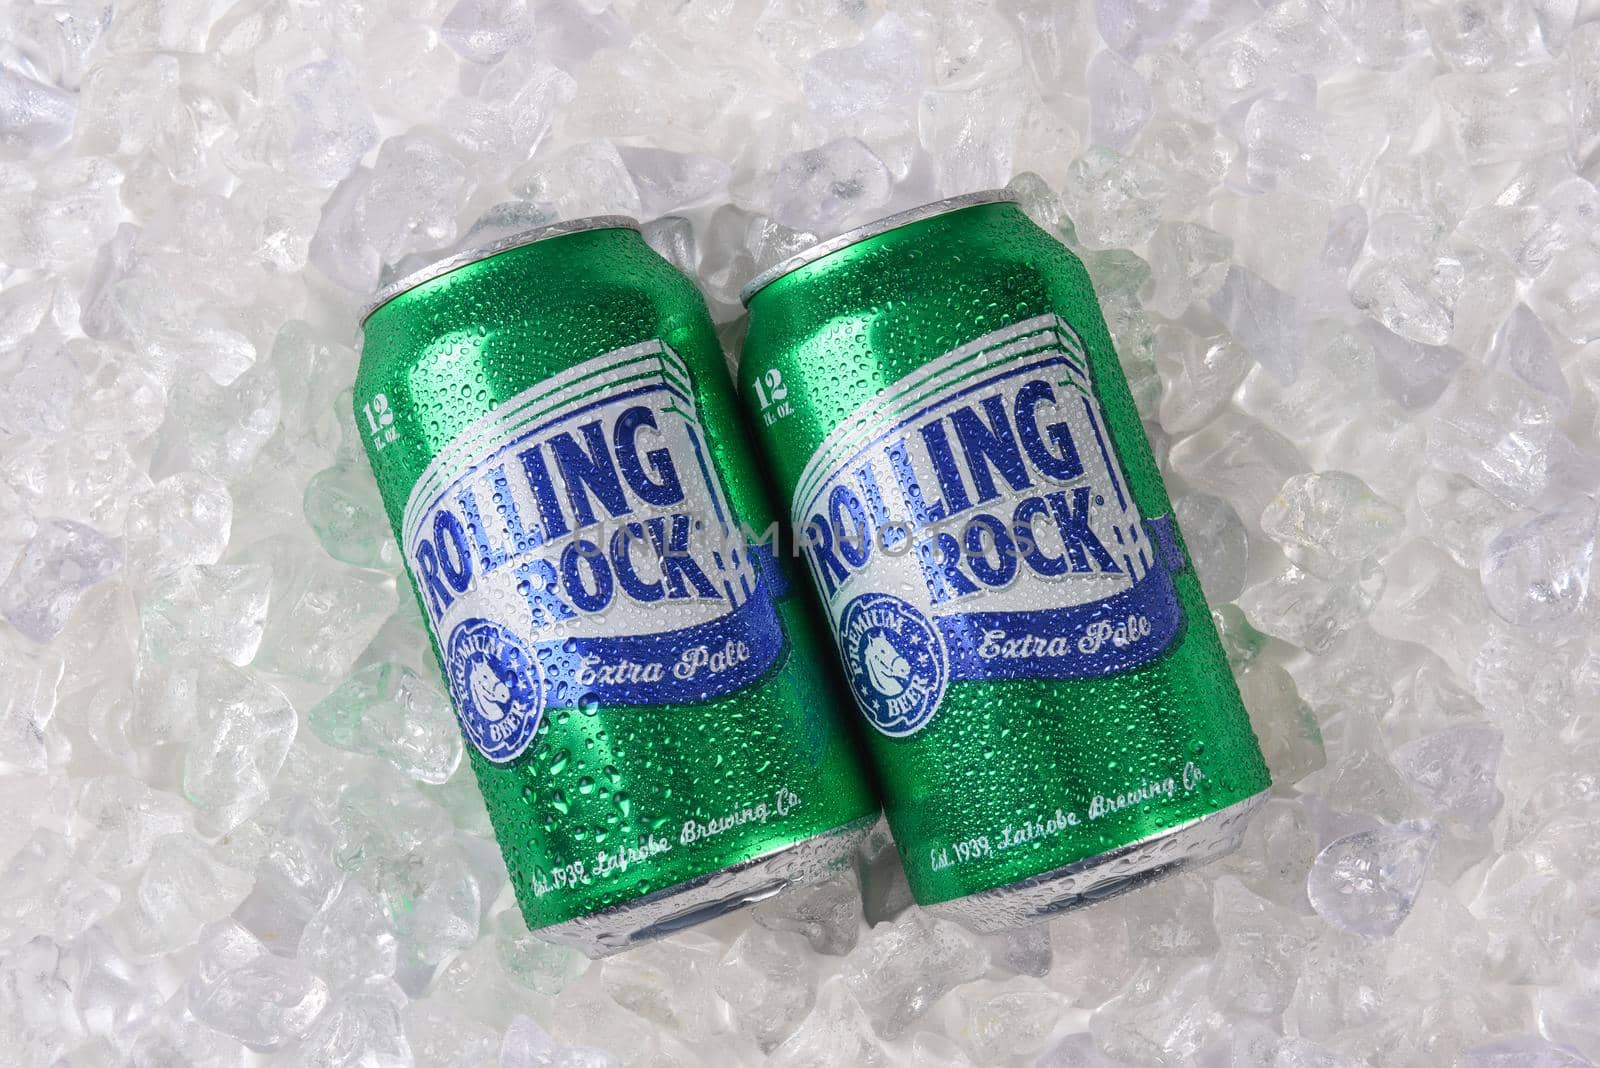 IRVINE, CALIFORNIA, FEBRUARY 7, 2018: Rolling Rock Extra Pale Beer. Two cans of the American beer, on ice, founded in 1939 in Latrobe, Pennsylvania.